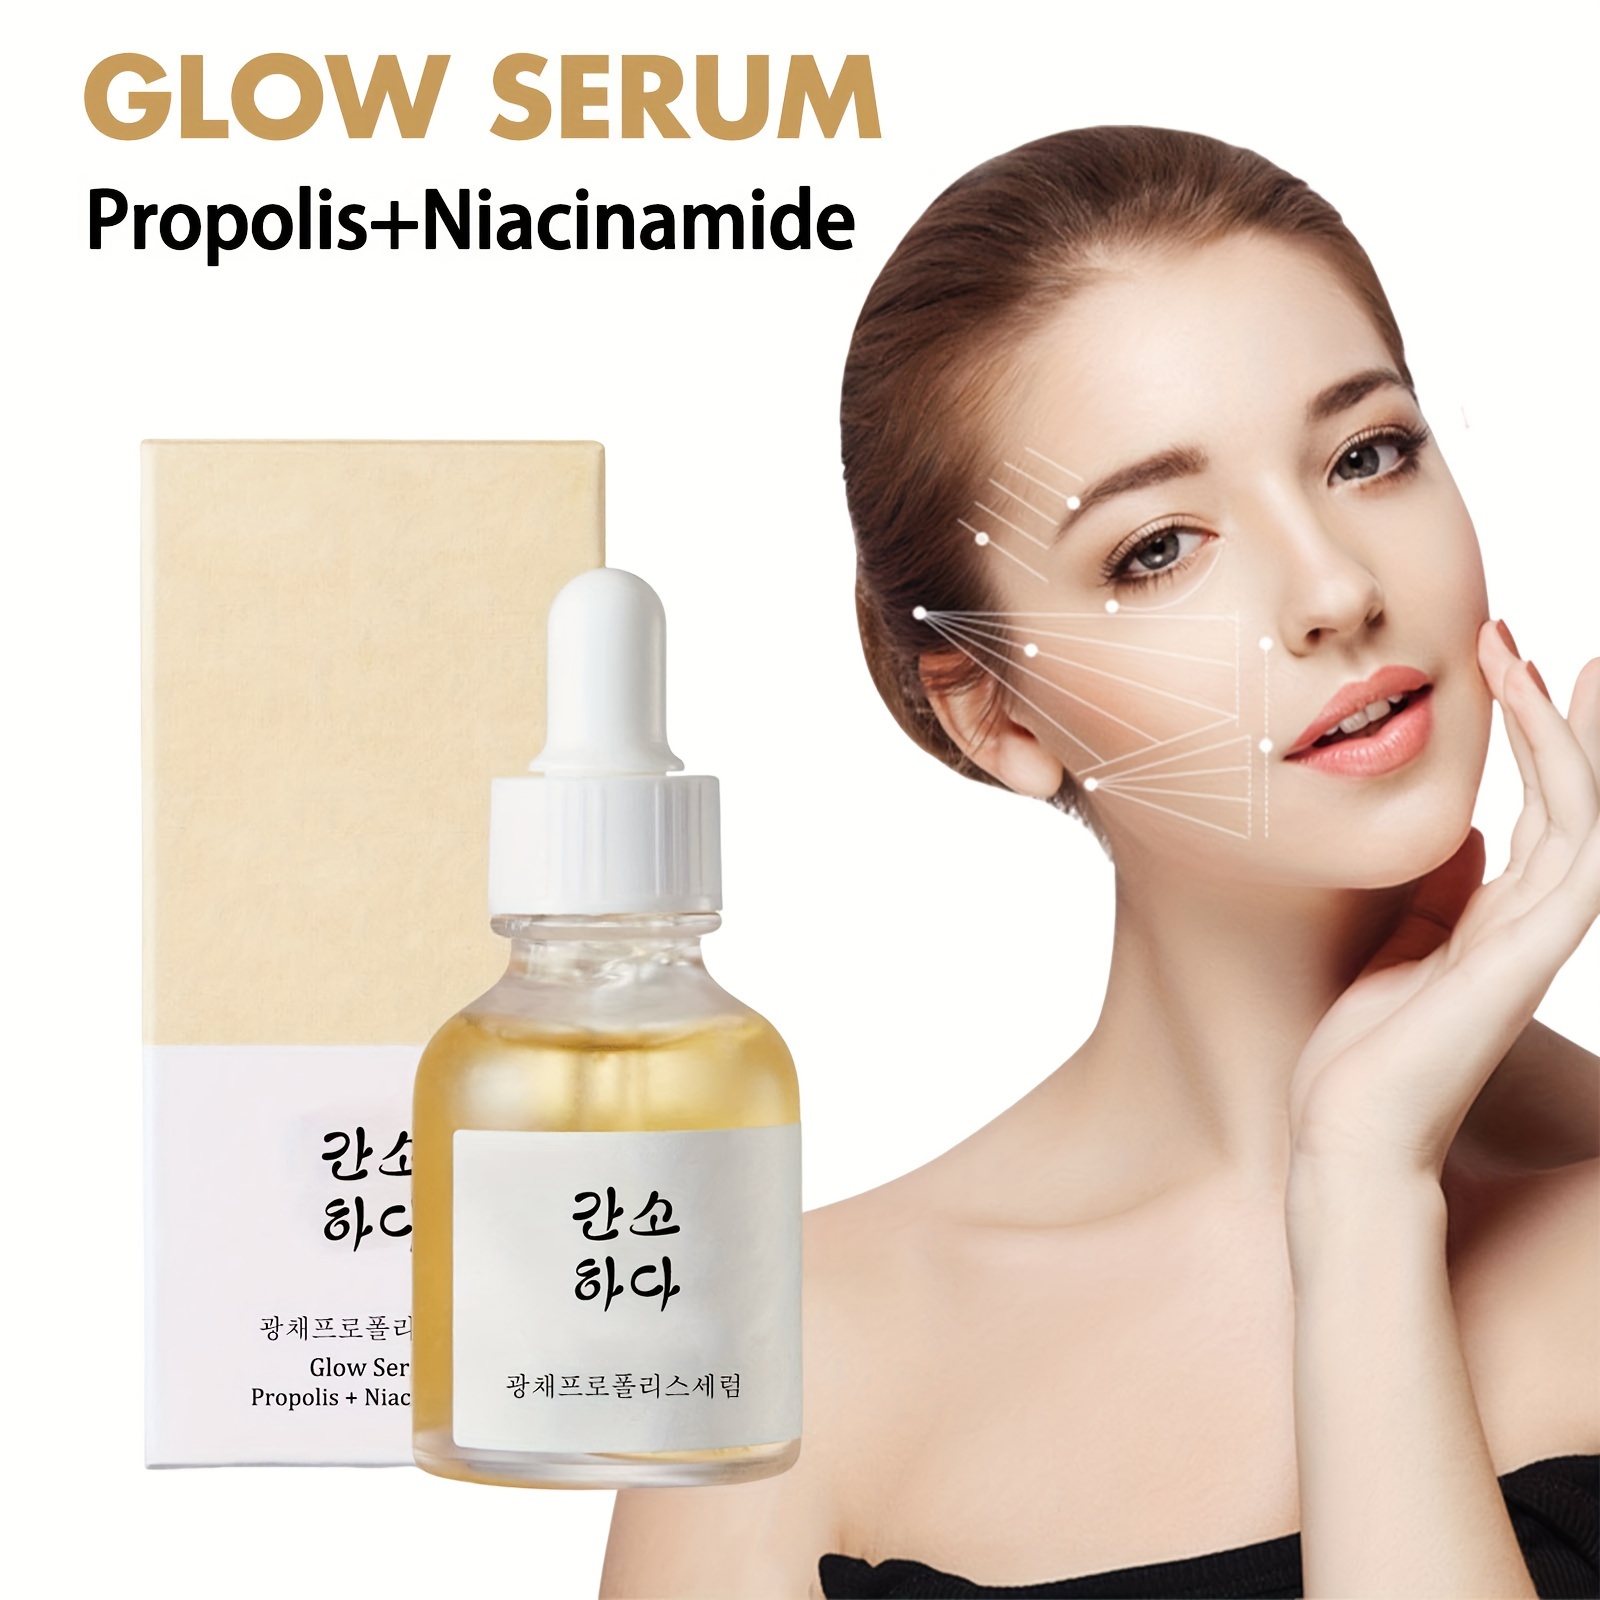 

30ml Propolis Niacinamide Glow Serum, Rejuvenate And Firm Skin, Hydrate And Moisturize Yellowish Skin, Water And Oil Balance, Men And Women Applicable